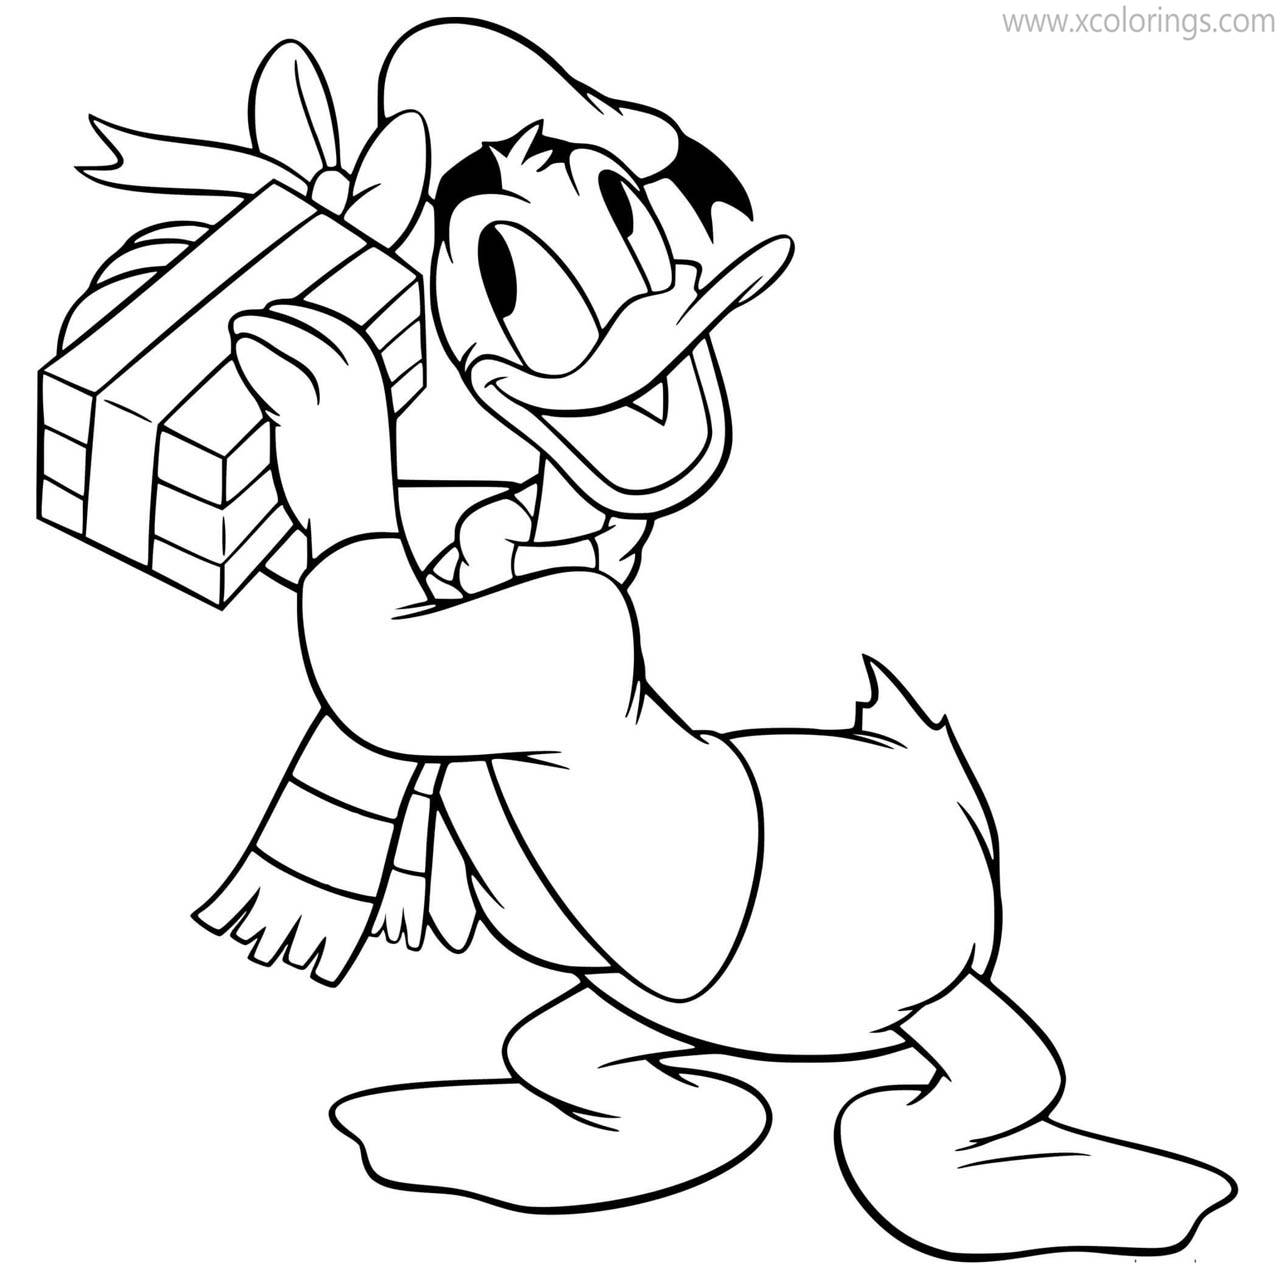 Free Donald Duck Christmas Coloring Pages printable